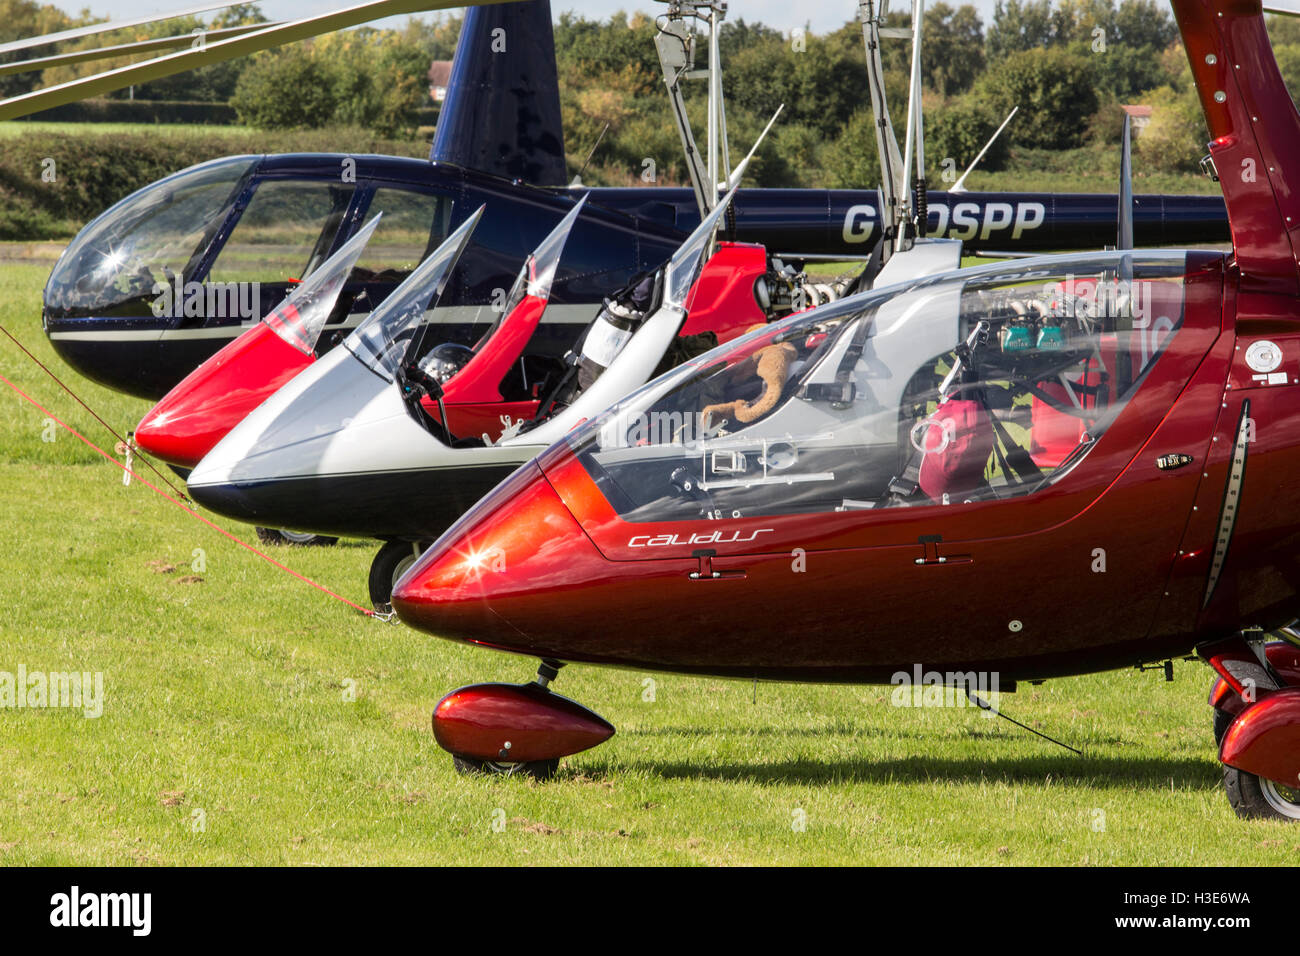 Autogyro aircraft and a Robinson R-44 helicopter parked together. Stock Photo